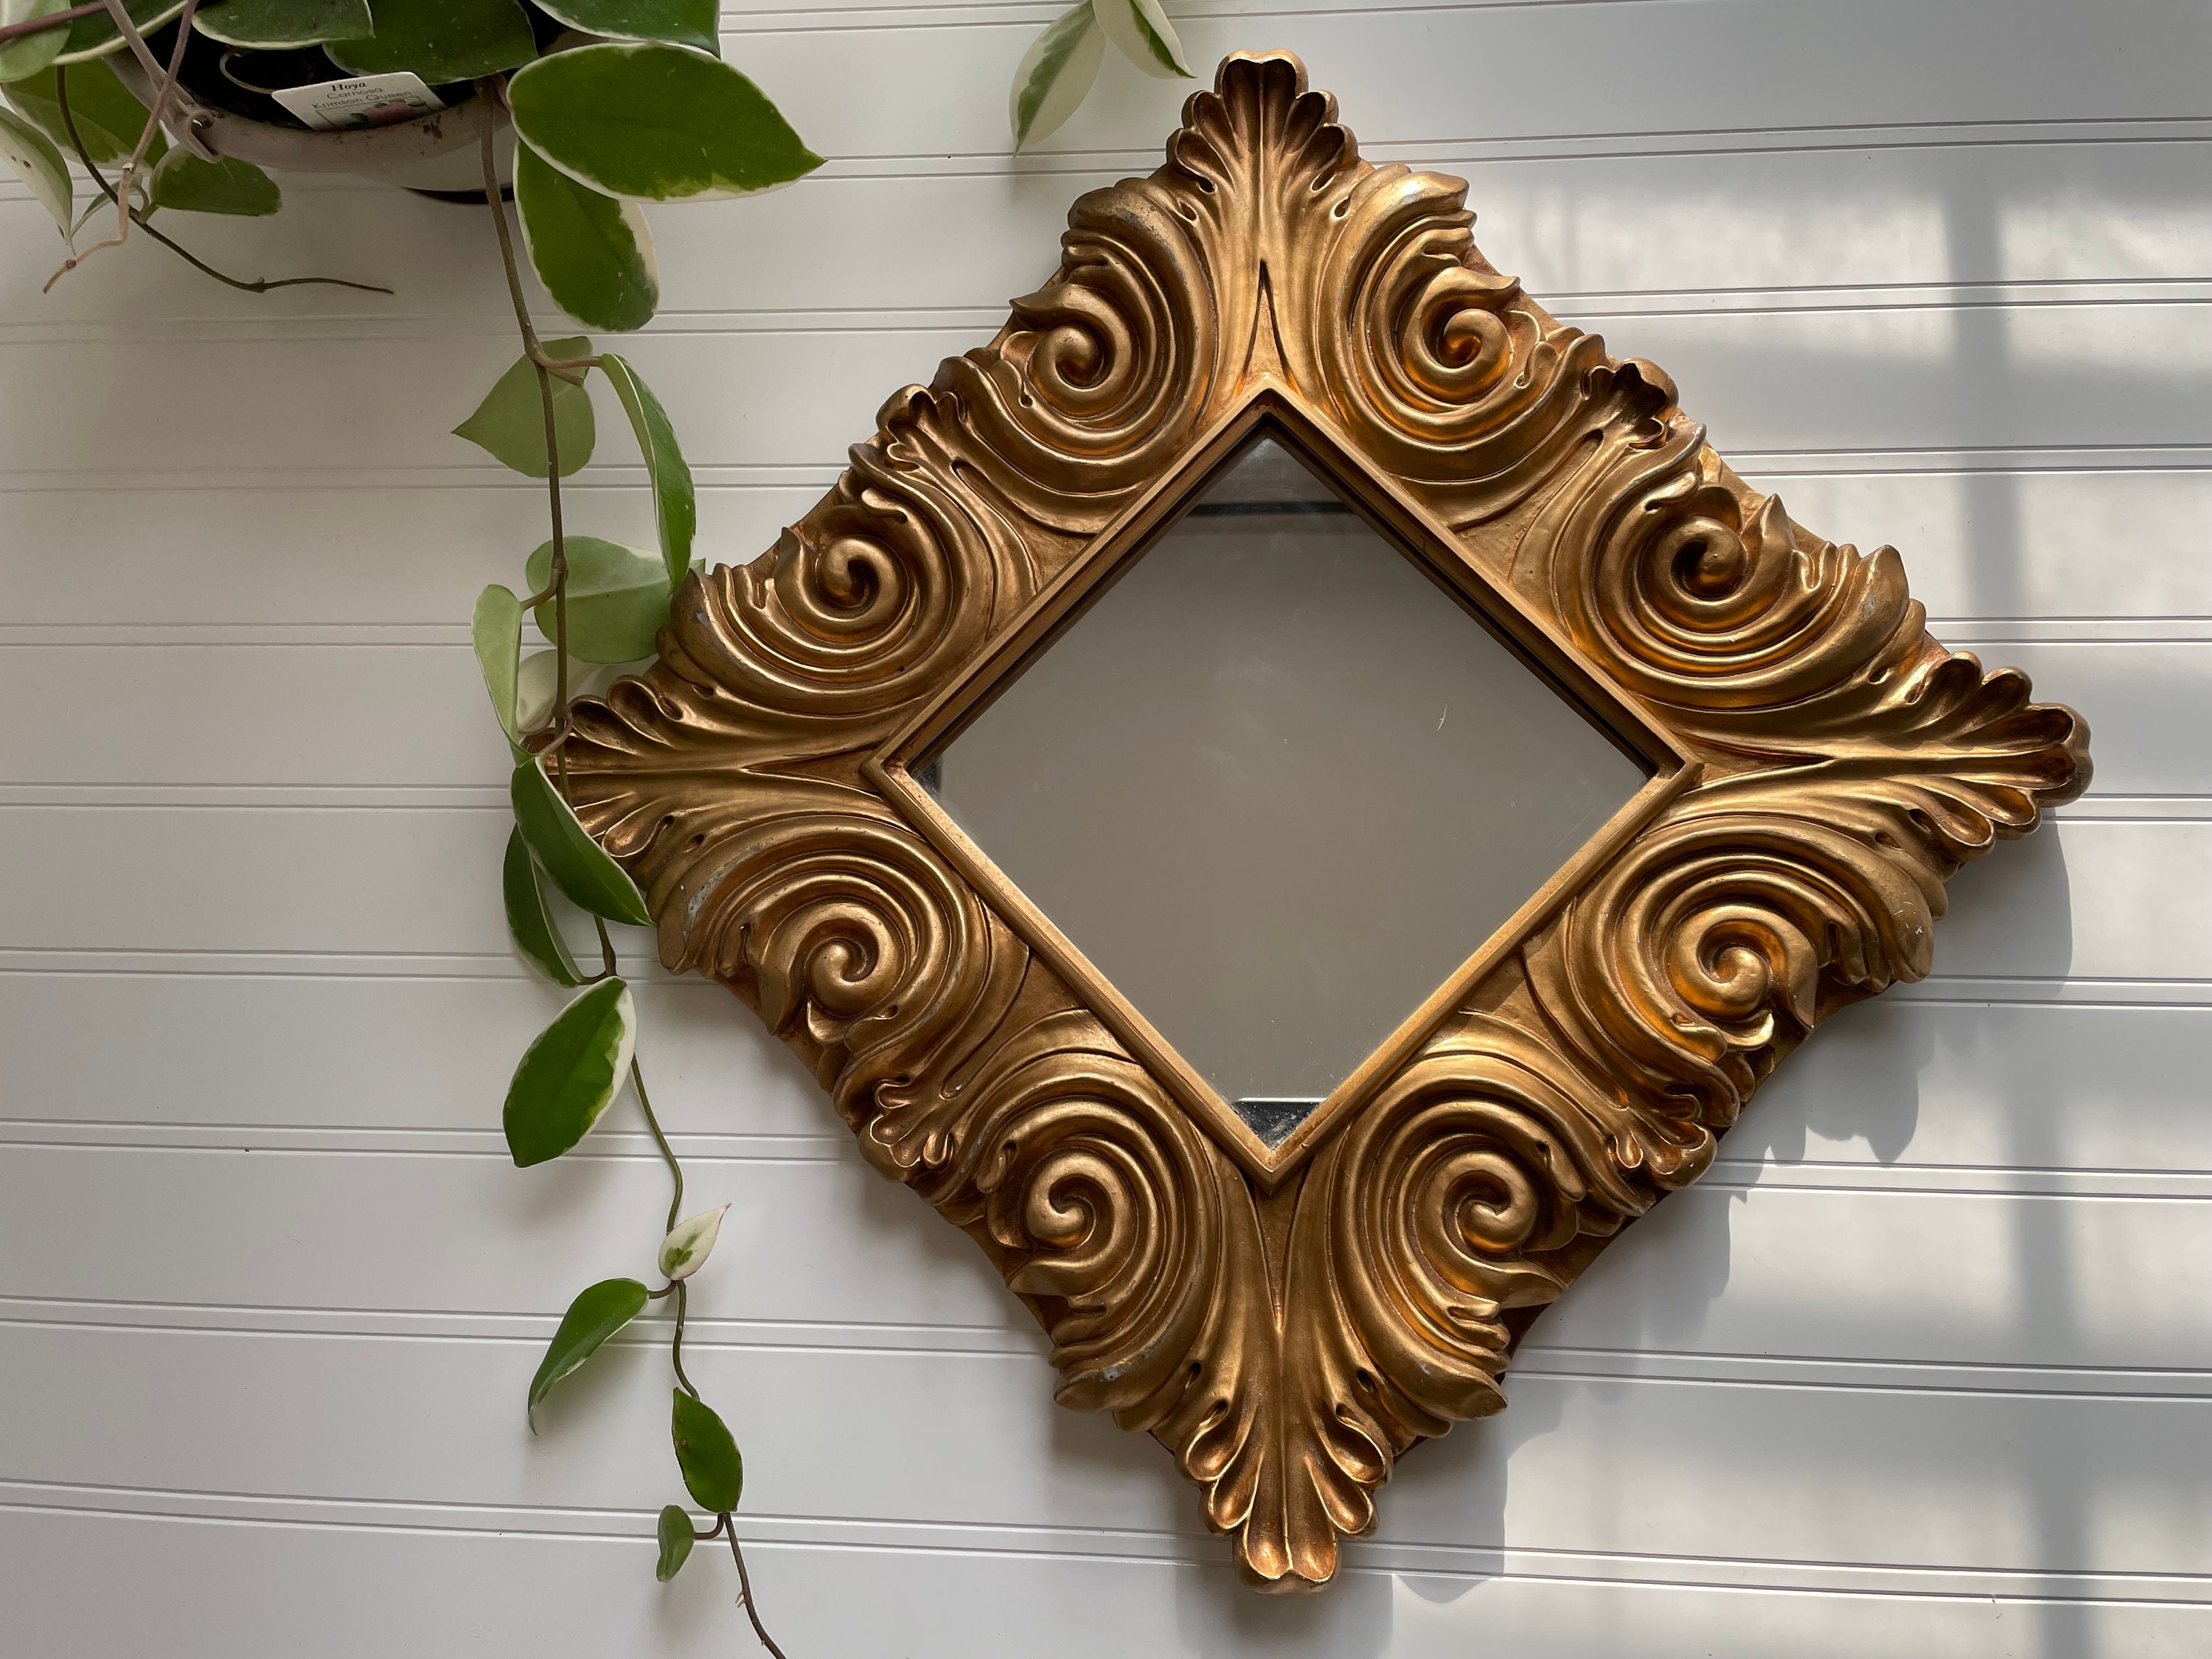 Antique Gold 65cm/26inch Mirror for Wall Decor, Vintage Bow Decoration  Frame Round Mirror for Entryway Hallway Bedroom